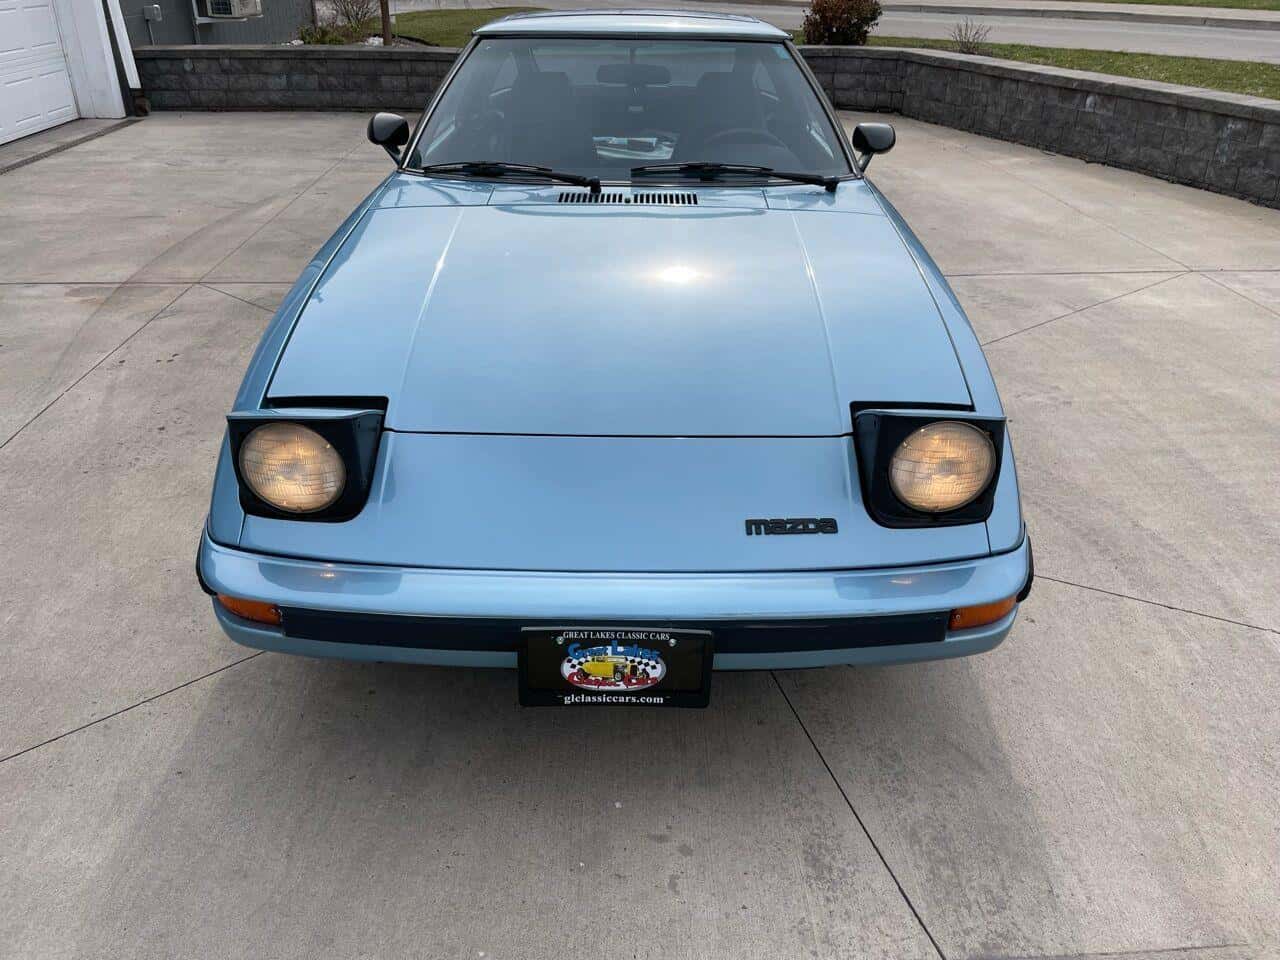 Mazda RX-7, Pick of the Day: 1982 Mazda RX-7, ClassicCars.com Journal